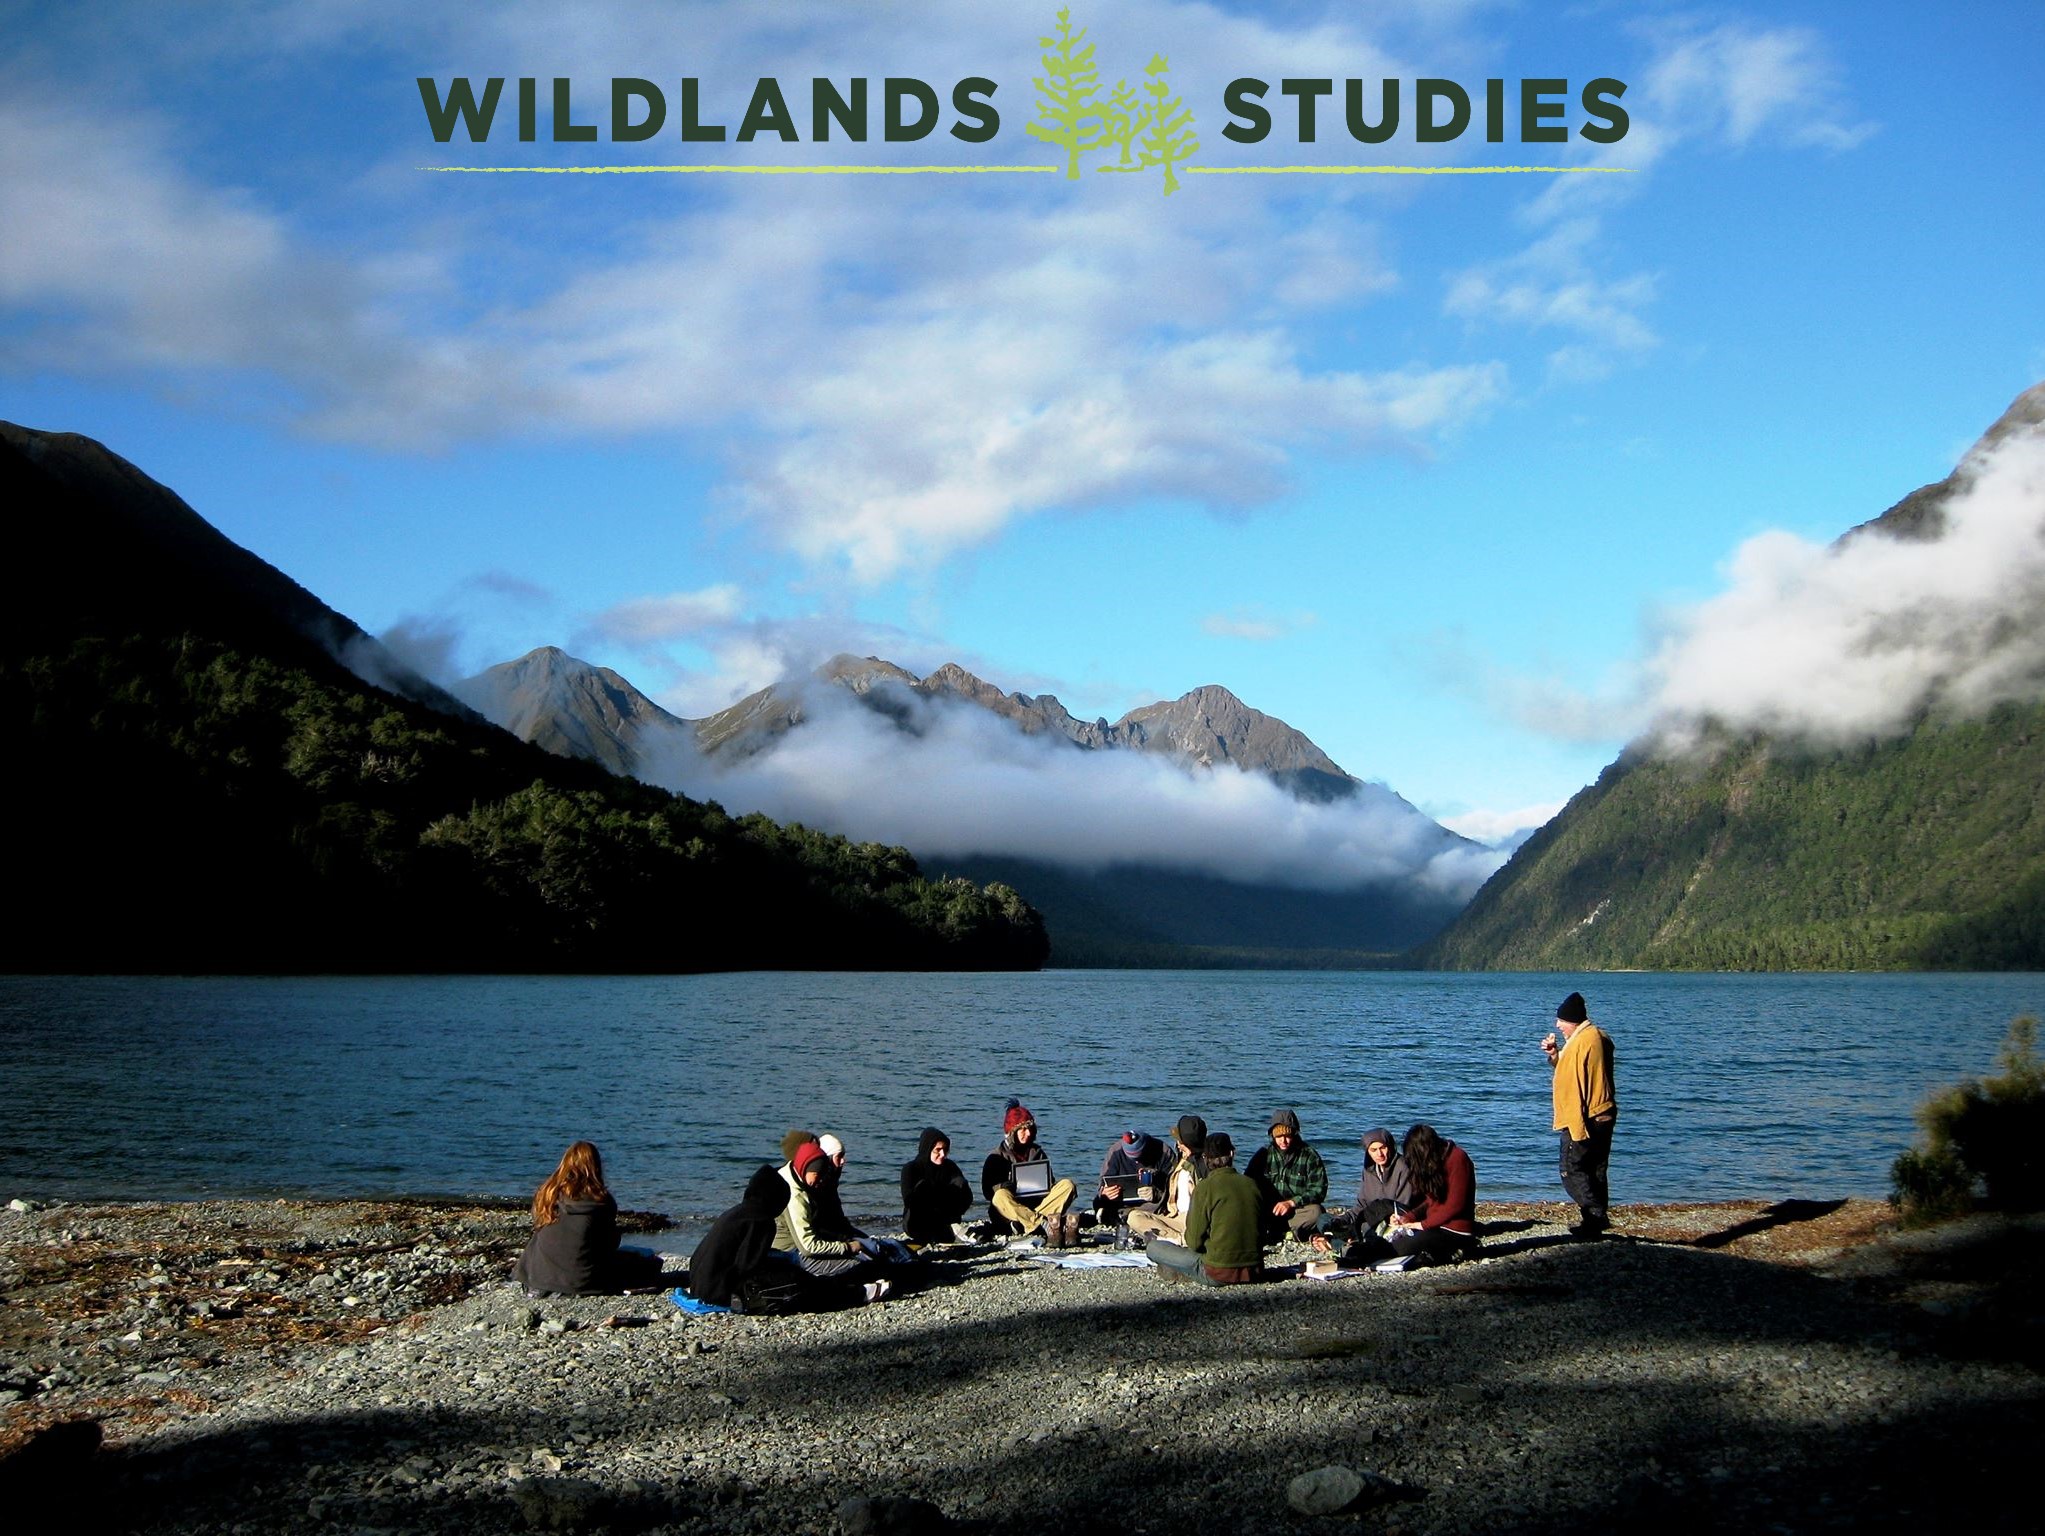 Students sitting in front of a lake with mountains and low hanging clouds in the background. The text &quot;Wildland Studies&quot; appears at the top.